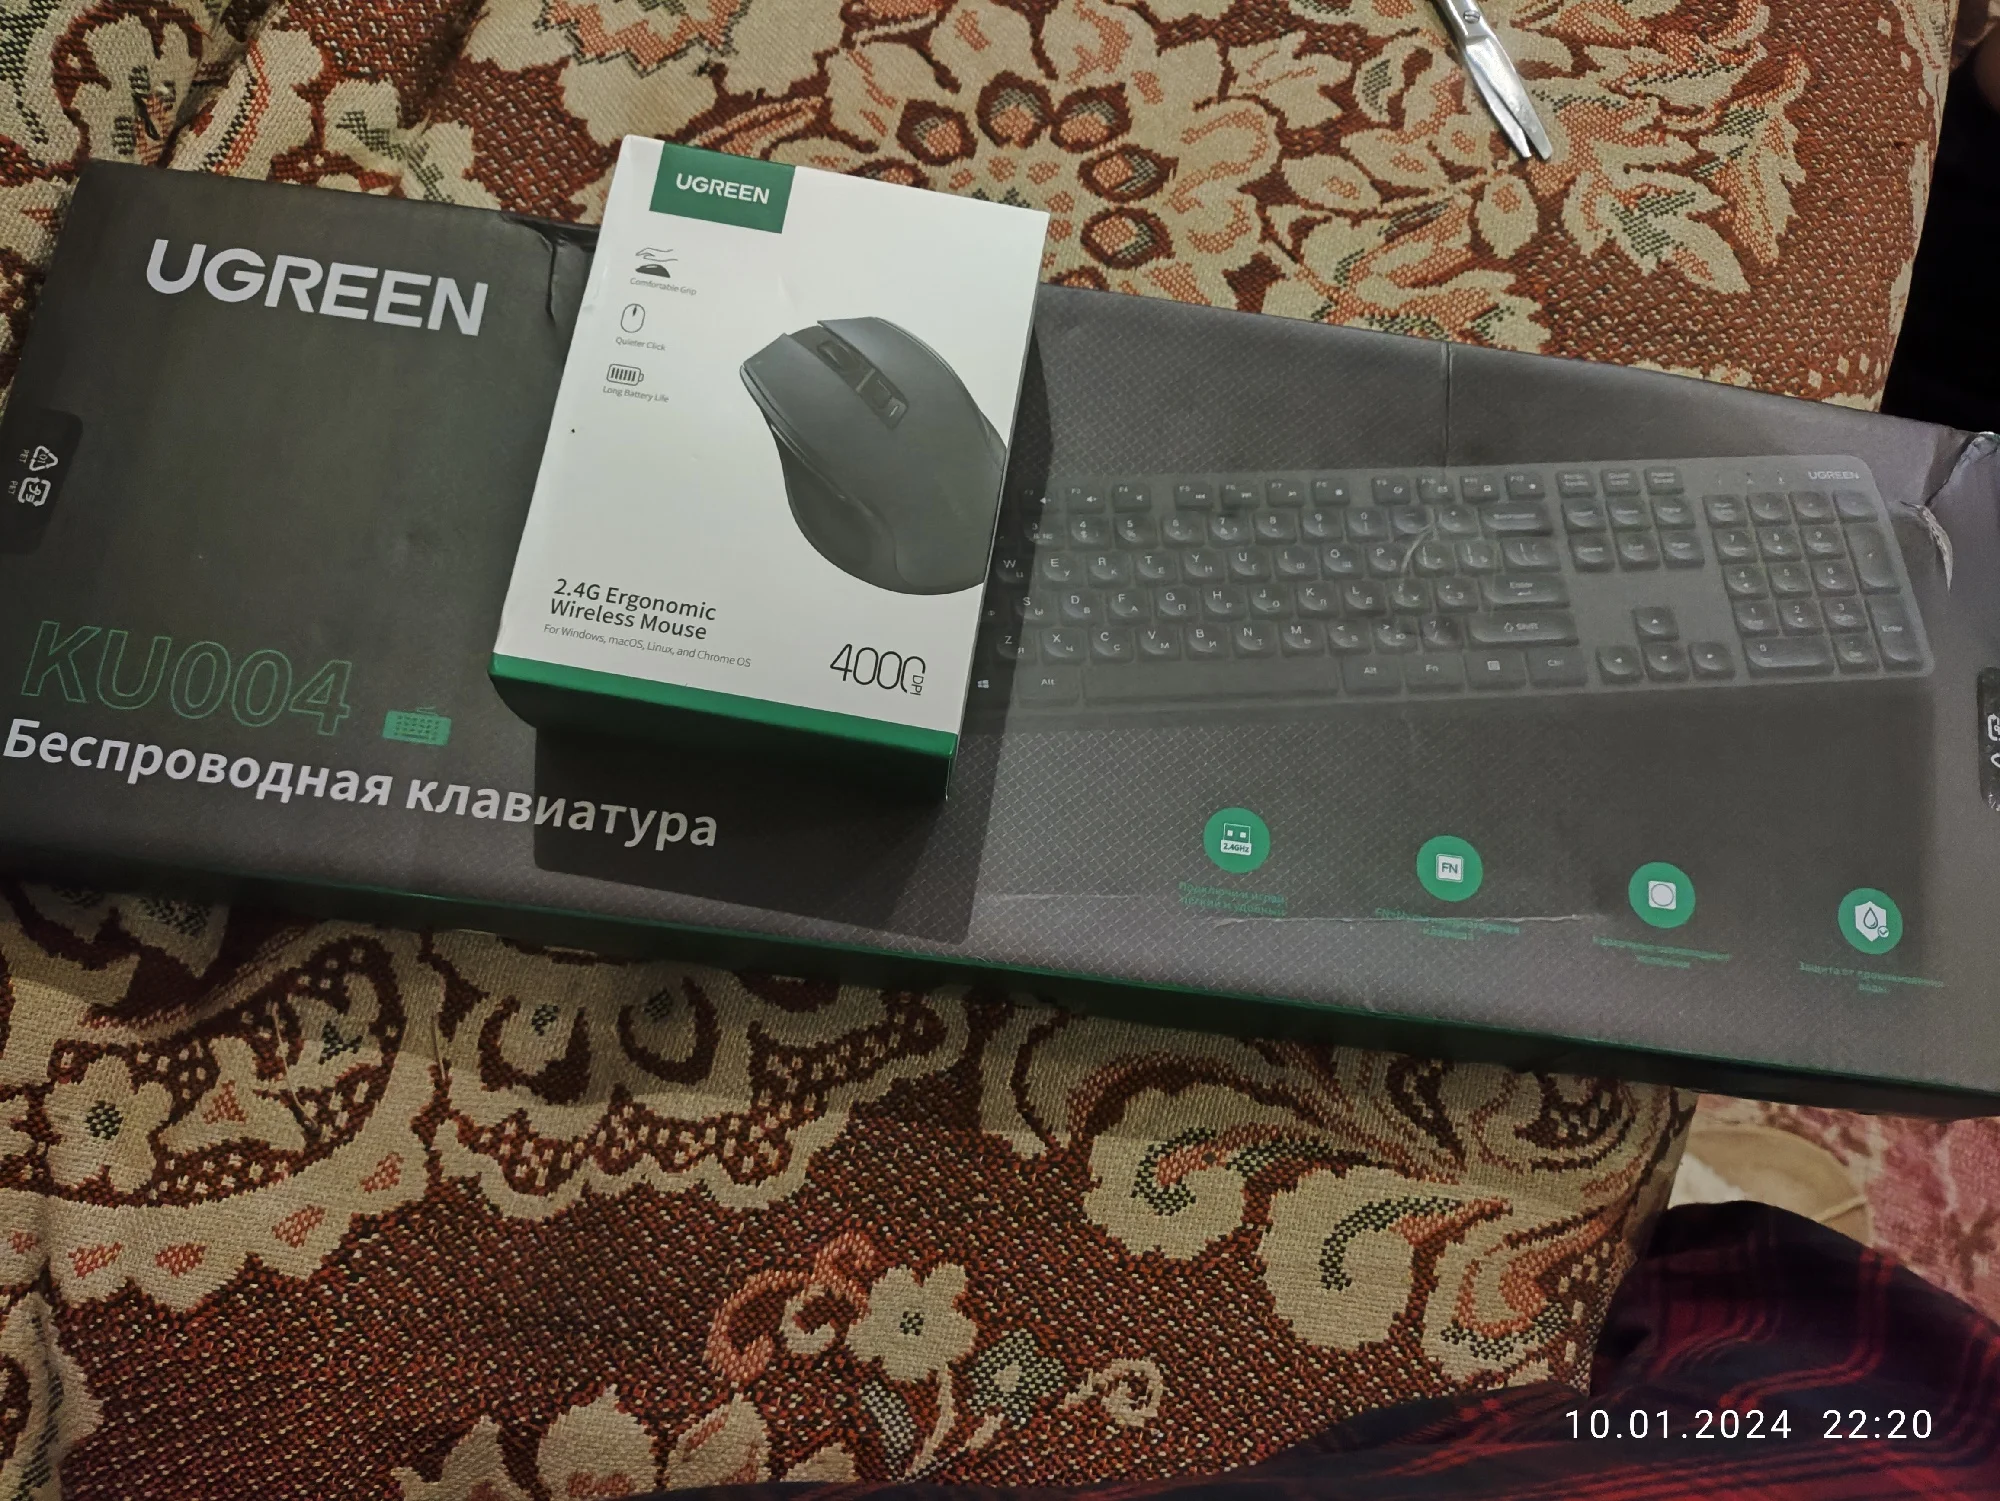 UGREEN 2.4G Wireless Keyboard and Mouse Combo with Multilingual Keycaps for Various Devices photo review